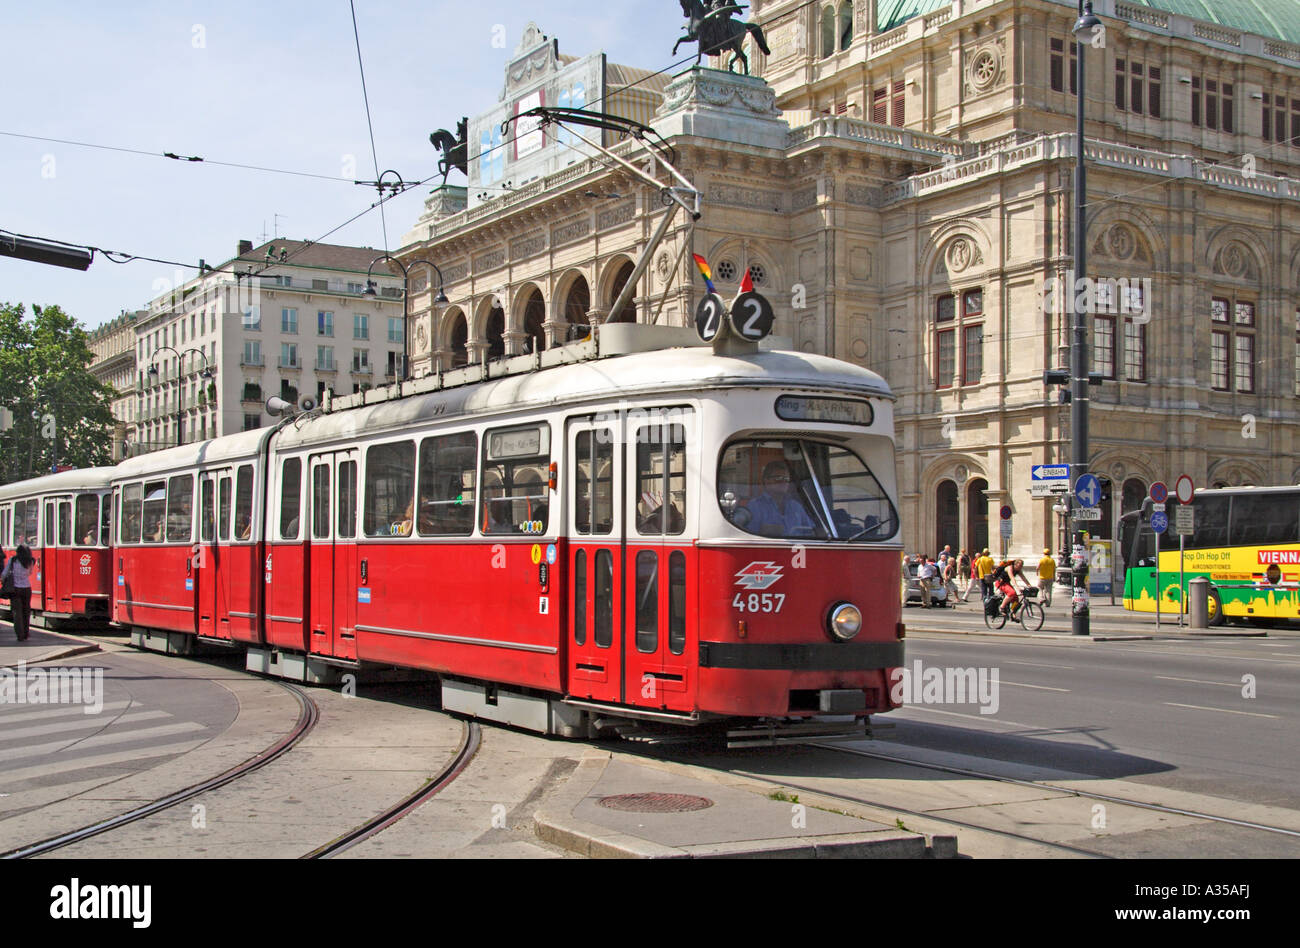 SGP Type E1 tram on route 2 outside the State Opera House, Vienna. Stock Photo